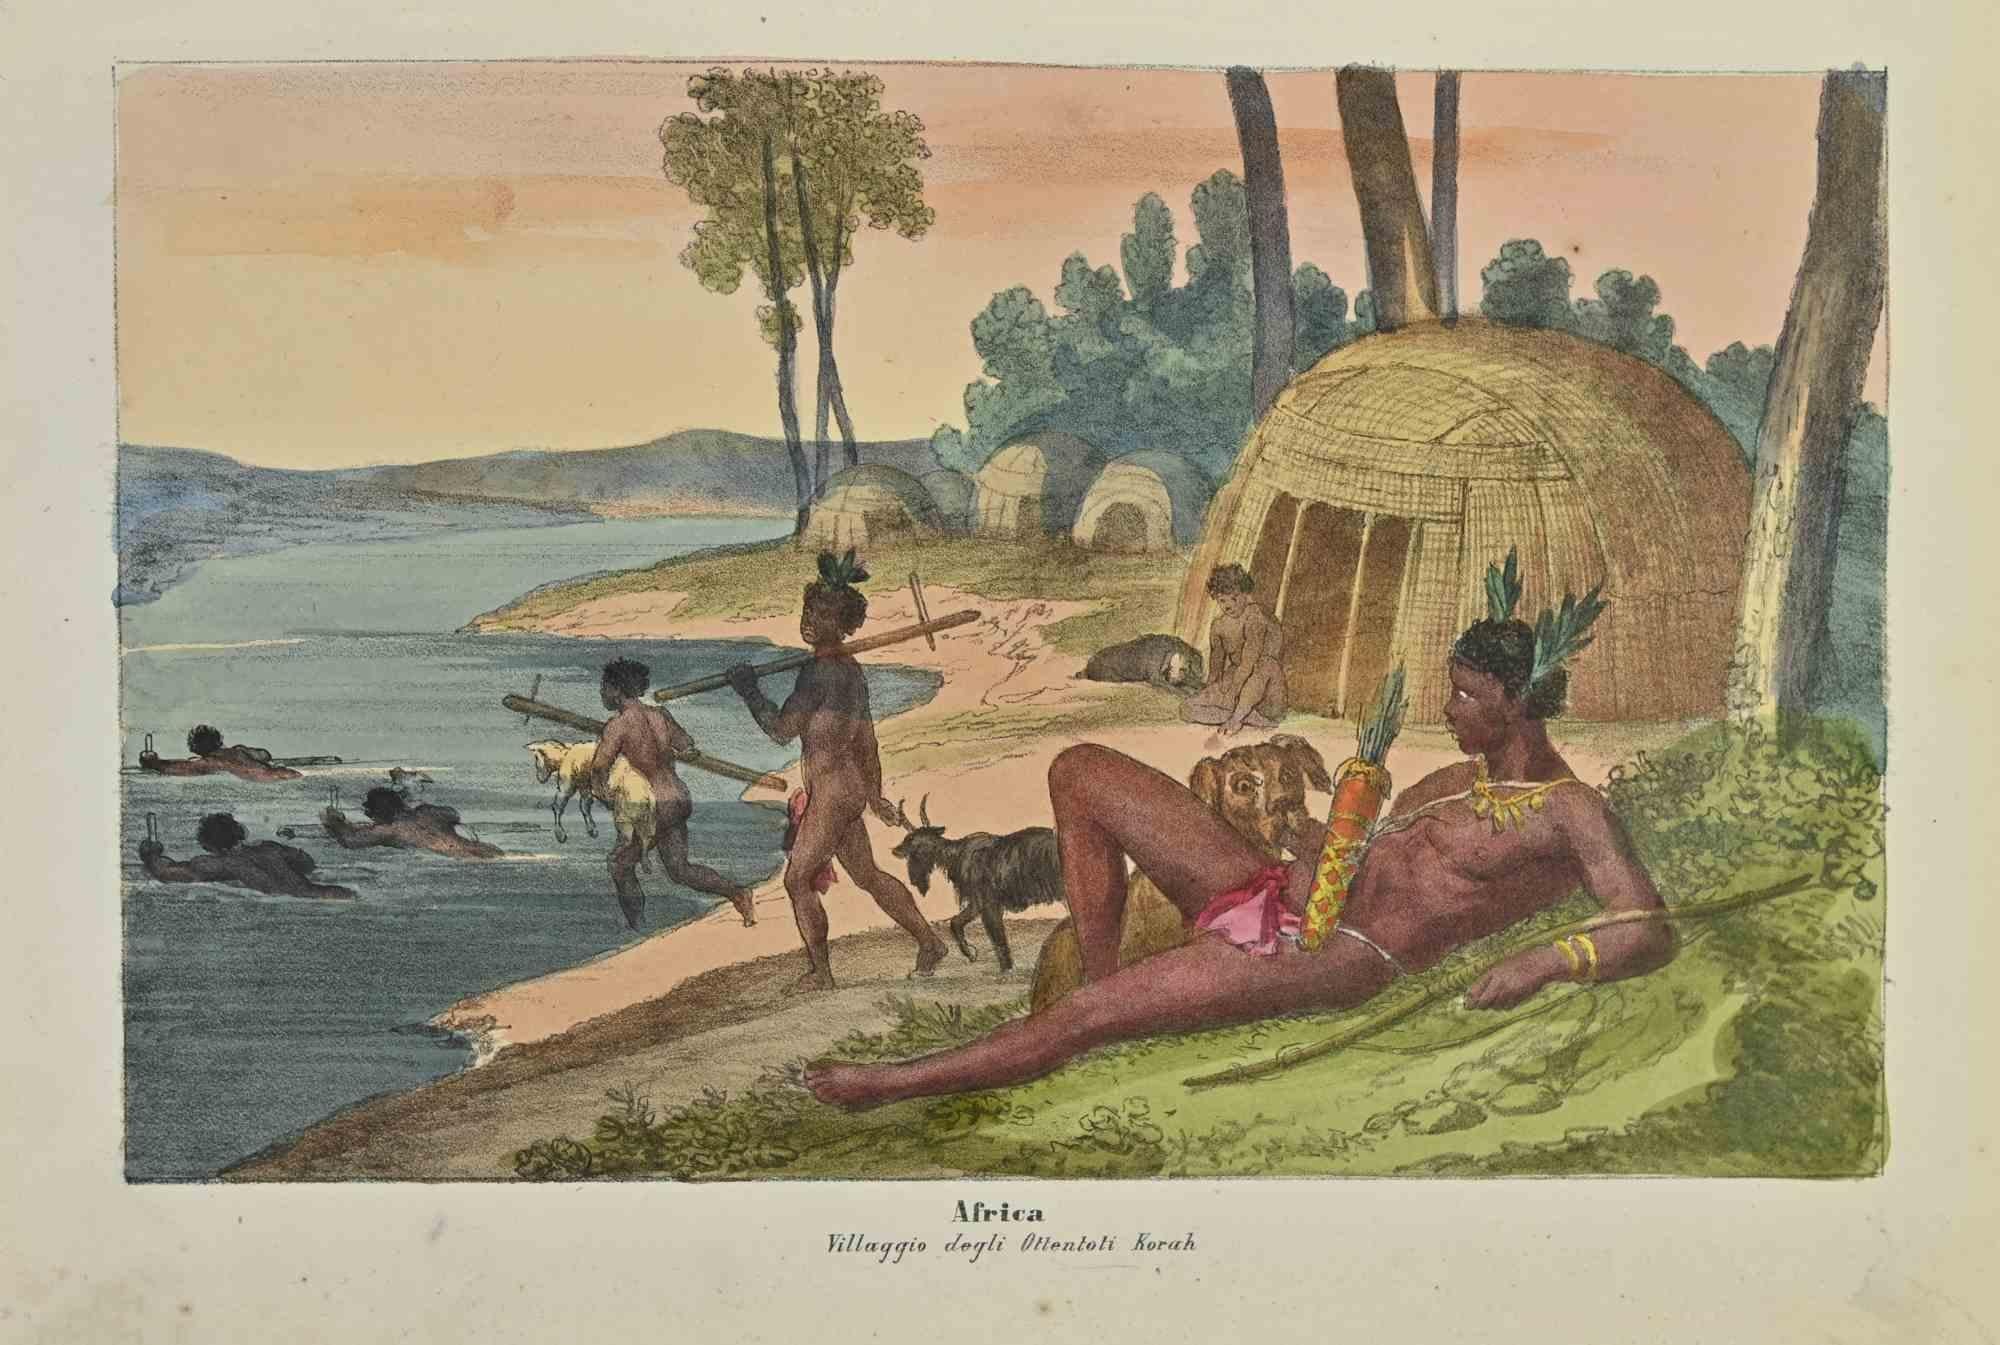 Ancient African Customs is a lithograph made by Auguste Wahlen in 1844.

Hand colored.

Good condition.

At the center of the artwork is the original title "Africa" and subtitle "Villaggio degli Ottentoti Korah".

The work is part of Suite Moeurs,